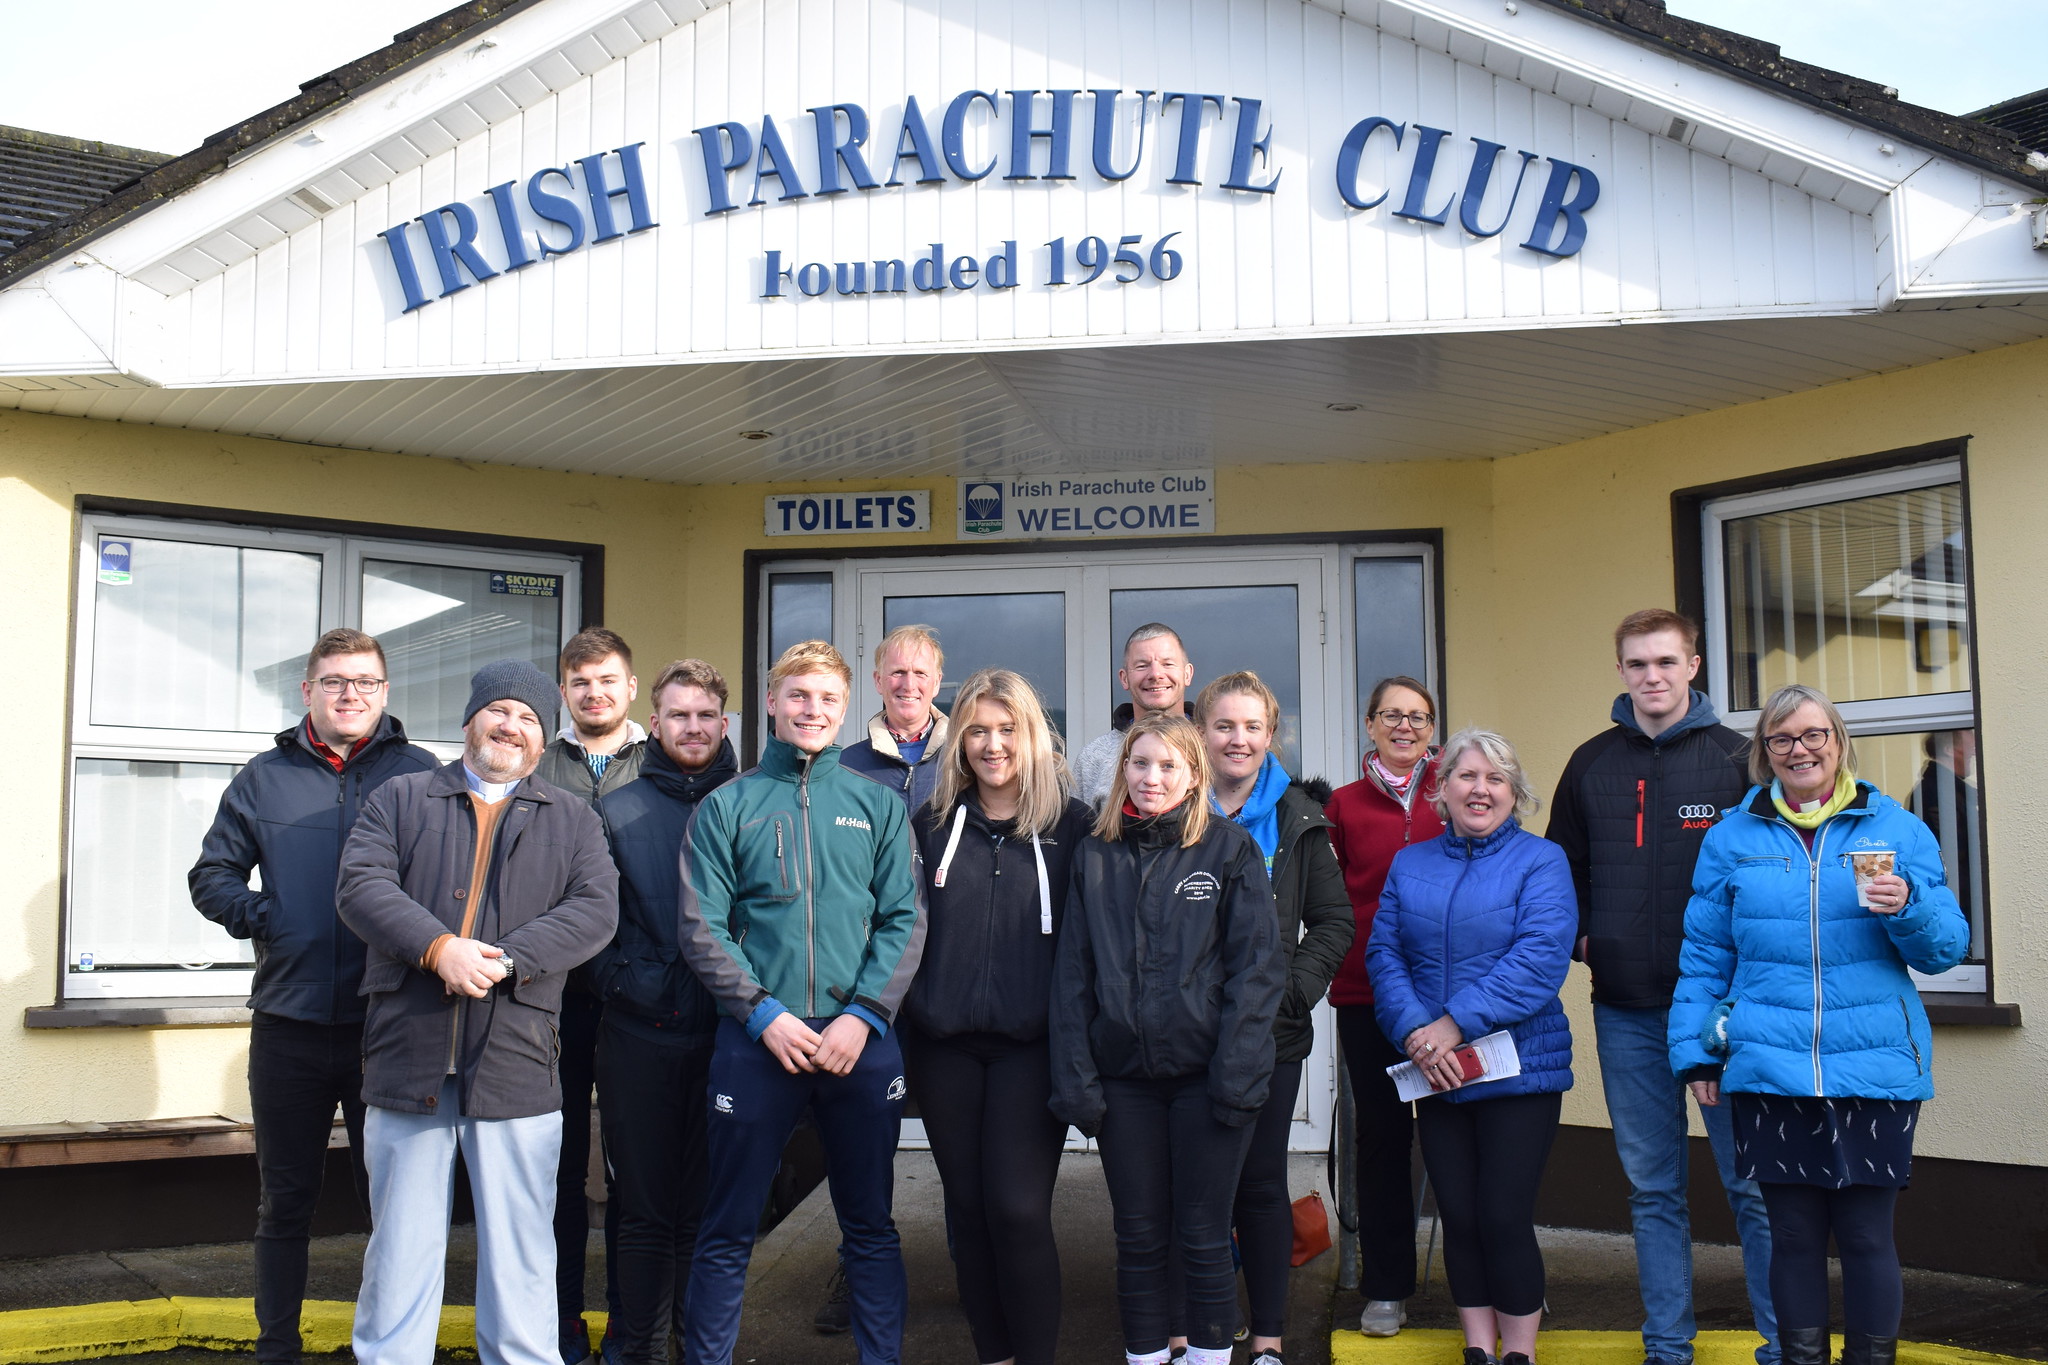 A sponsored skydive, organised by the Dioceses of Meath and Kildare in November 2019 as part of its ‘Mind Yourself' campaign to highlight mental health.